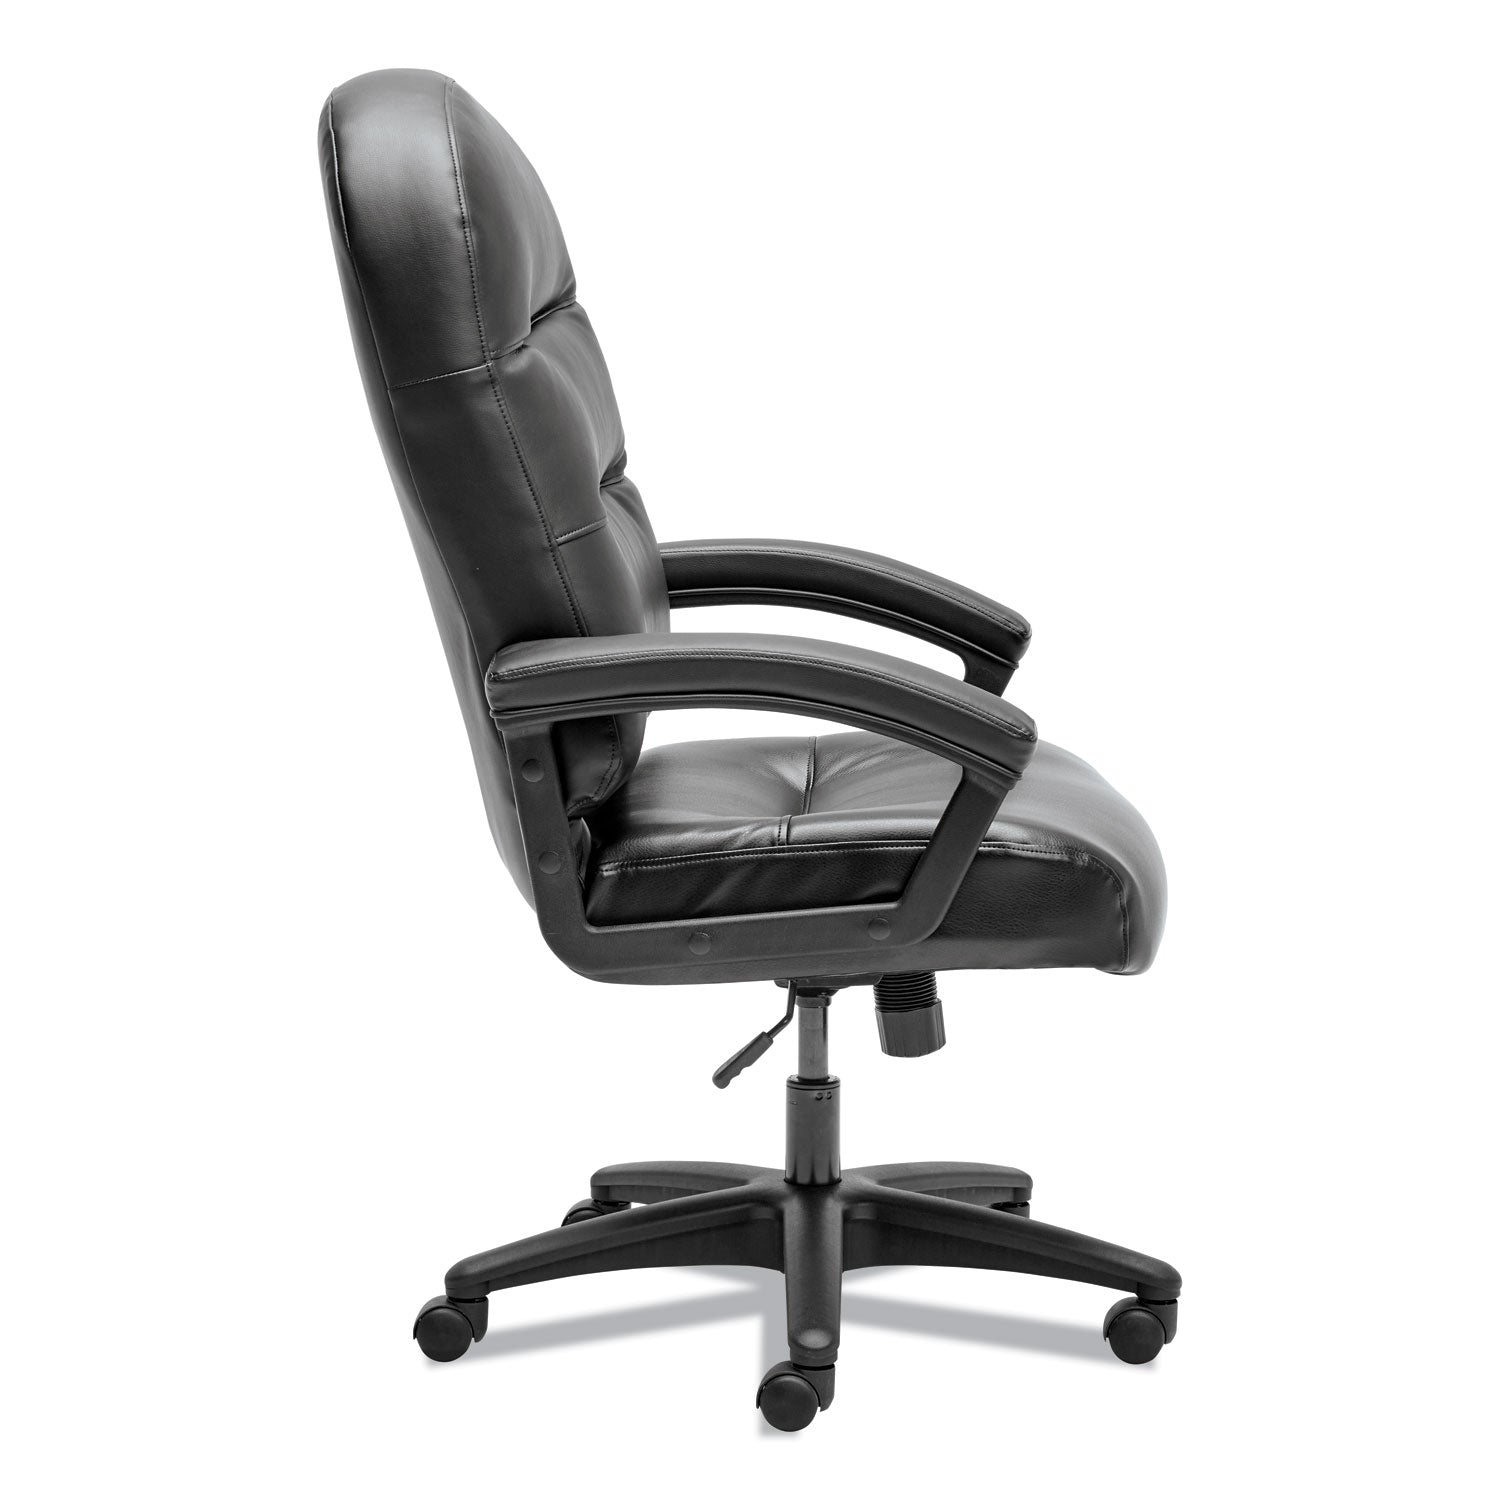 pillow-soft-2090-series-executive-high-back-swivel-tilt-chair-supports-up-to-250-lb-16-to-21-seat-height-black_hon2095hpwst11t - 6